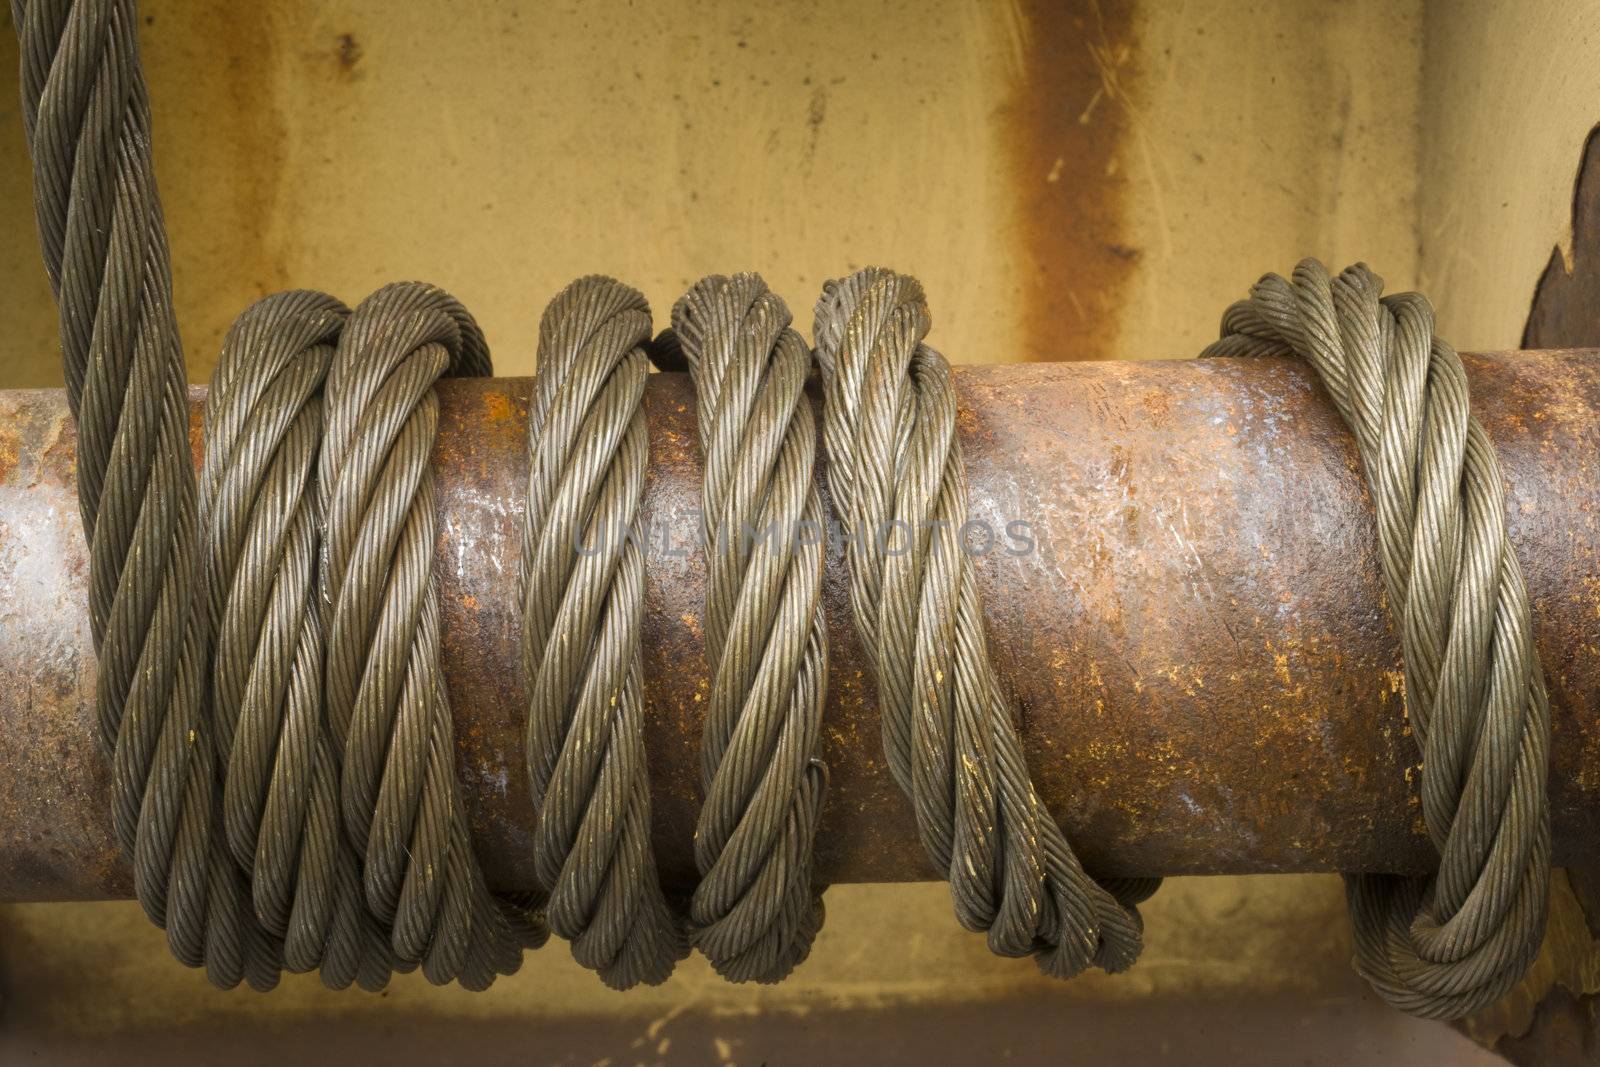 A cable designed to hold freight on a railcar